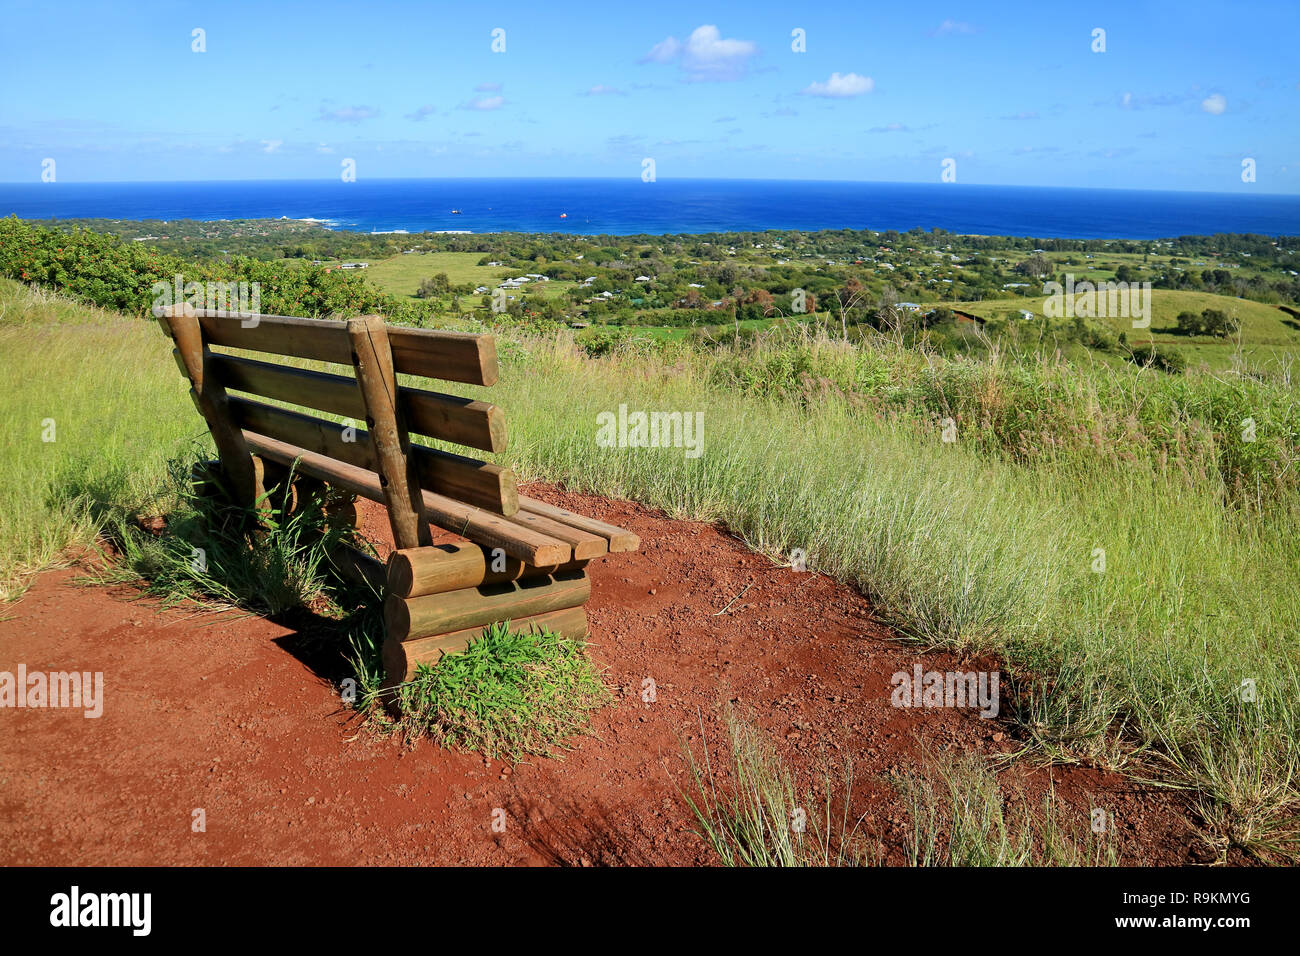 Viewpoint for Hanga Roa and Pacific Ocean with a Wooden Bench on Red Scoria at Puna Pau Volcano, Moai Statues' Topknots Quarry on Easter Island, Chile Stock Photo